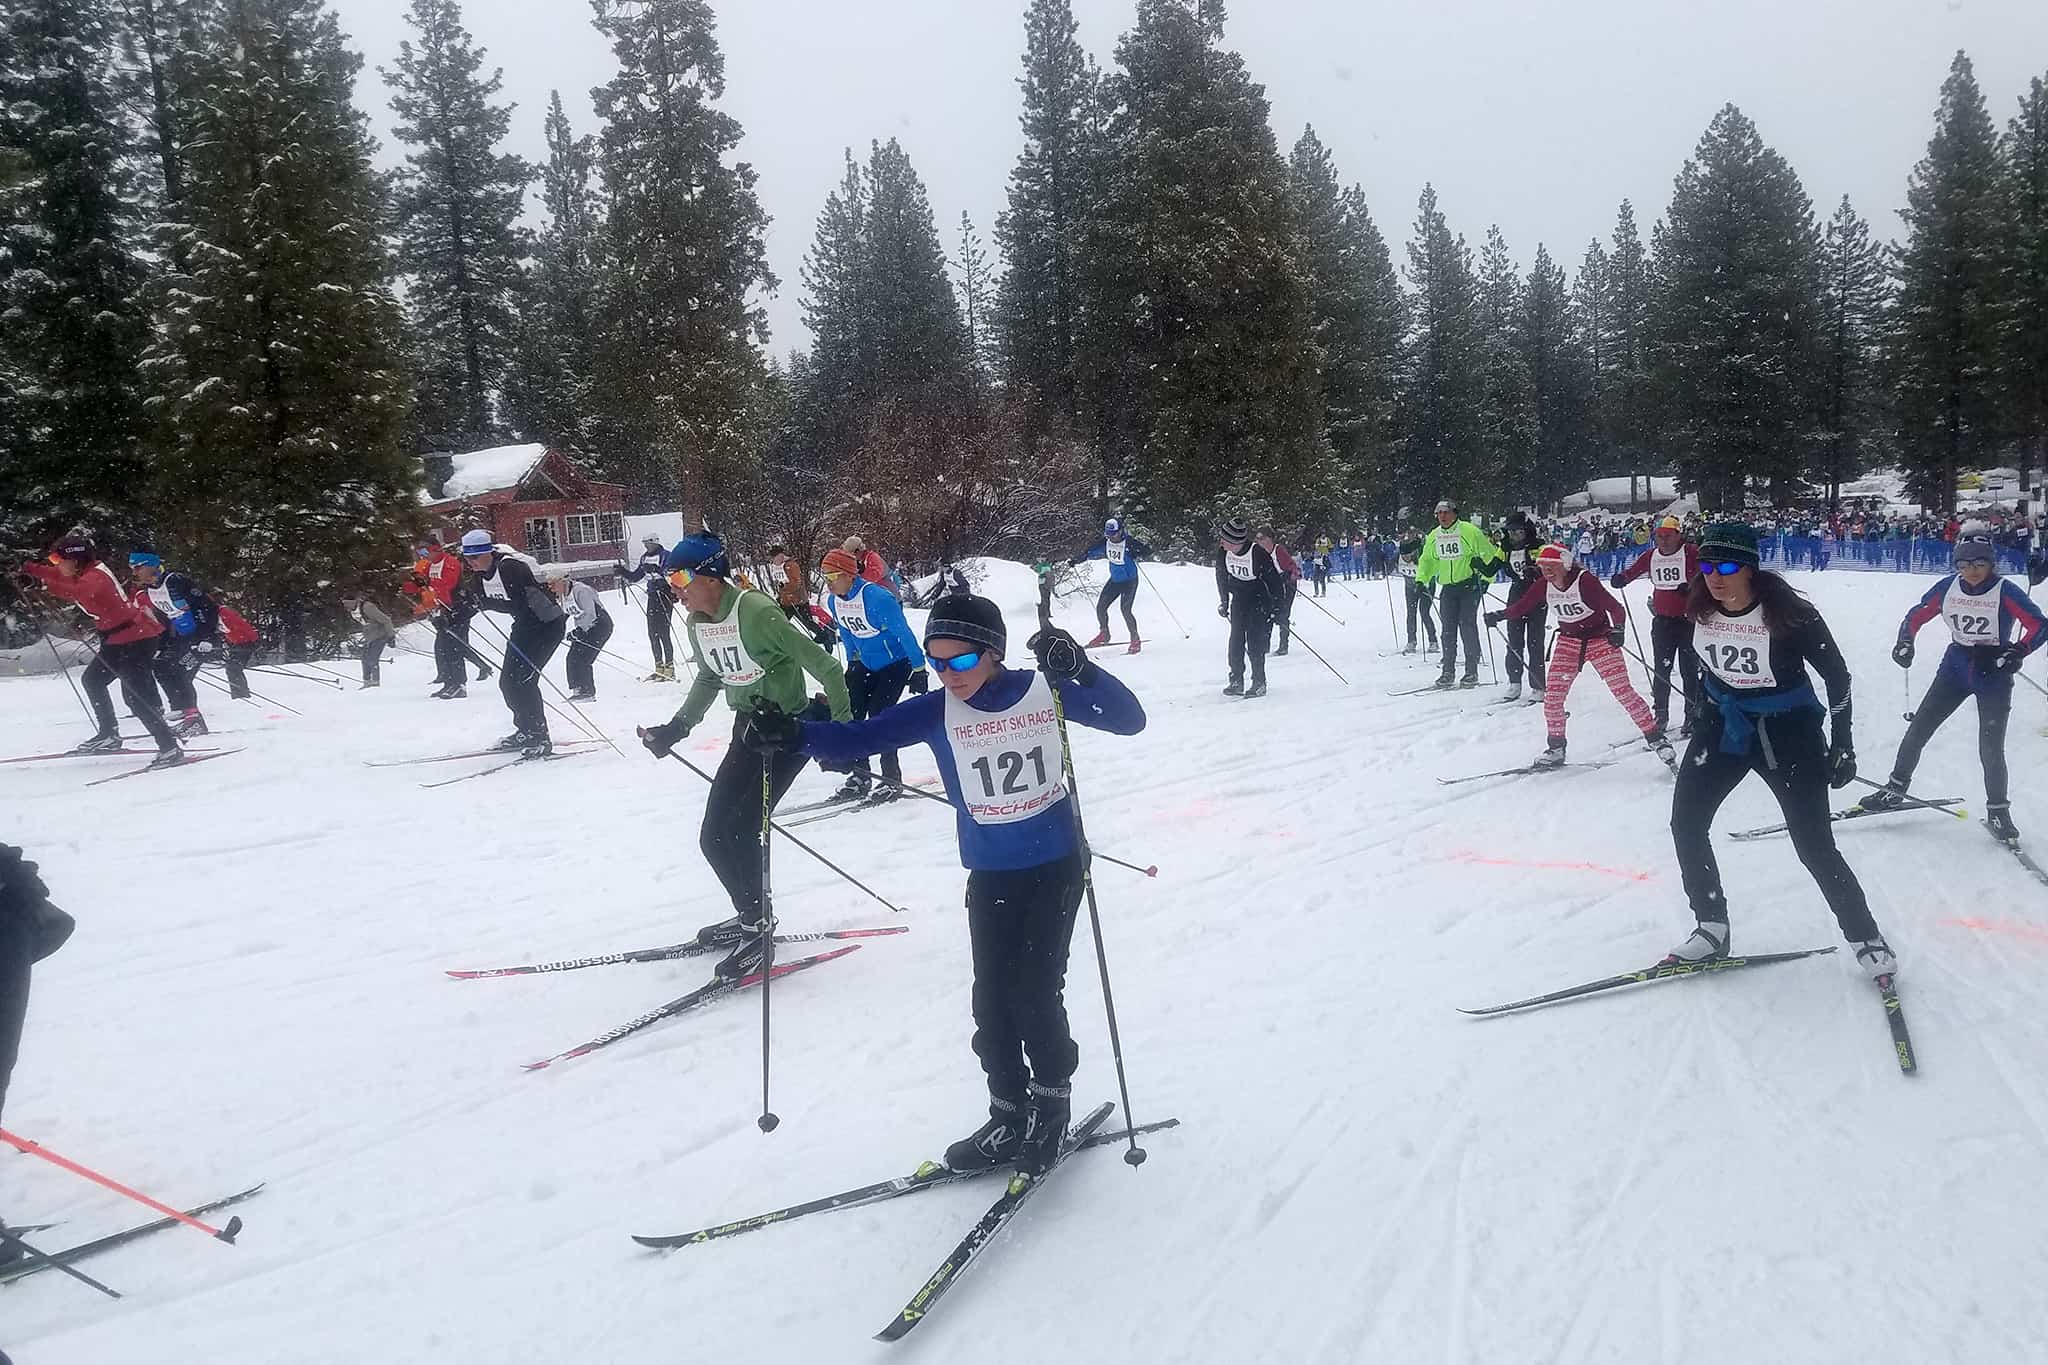 TEA Dominates the Podium at the 42nd Annual Great Ski Race Tahoe